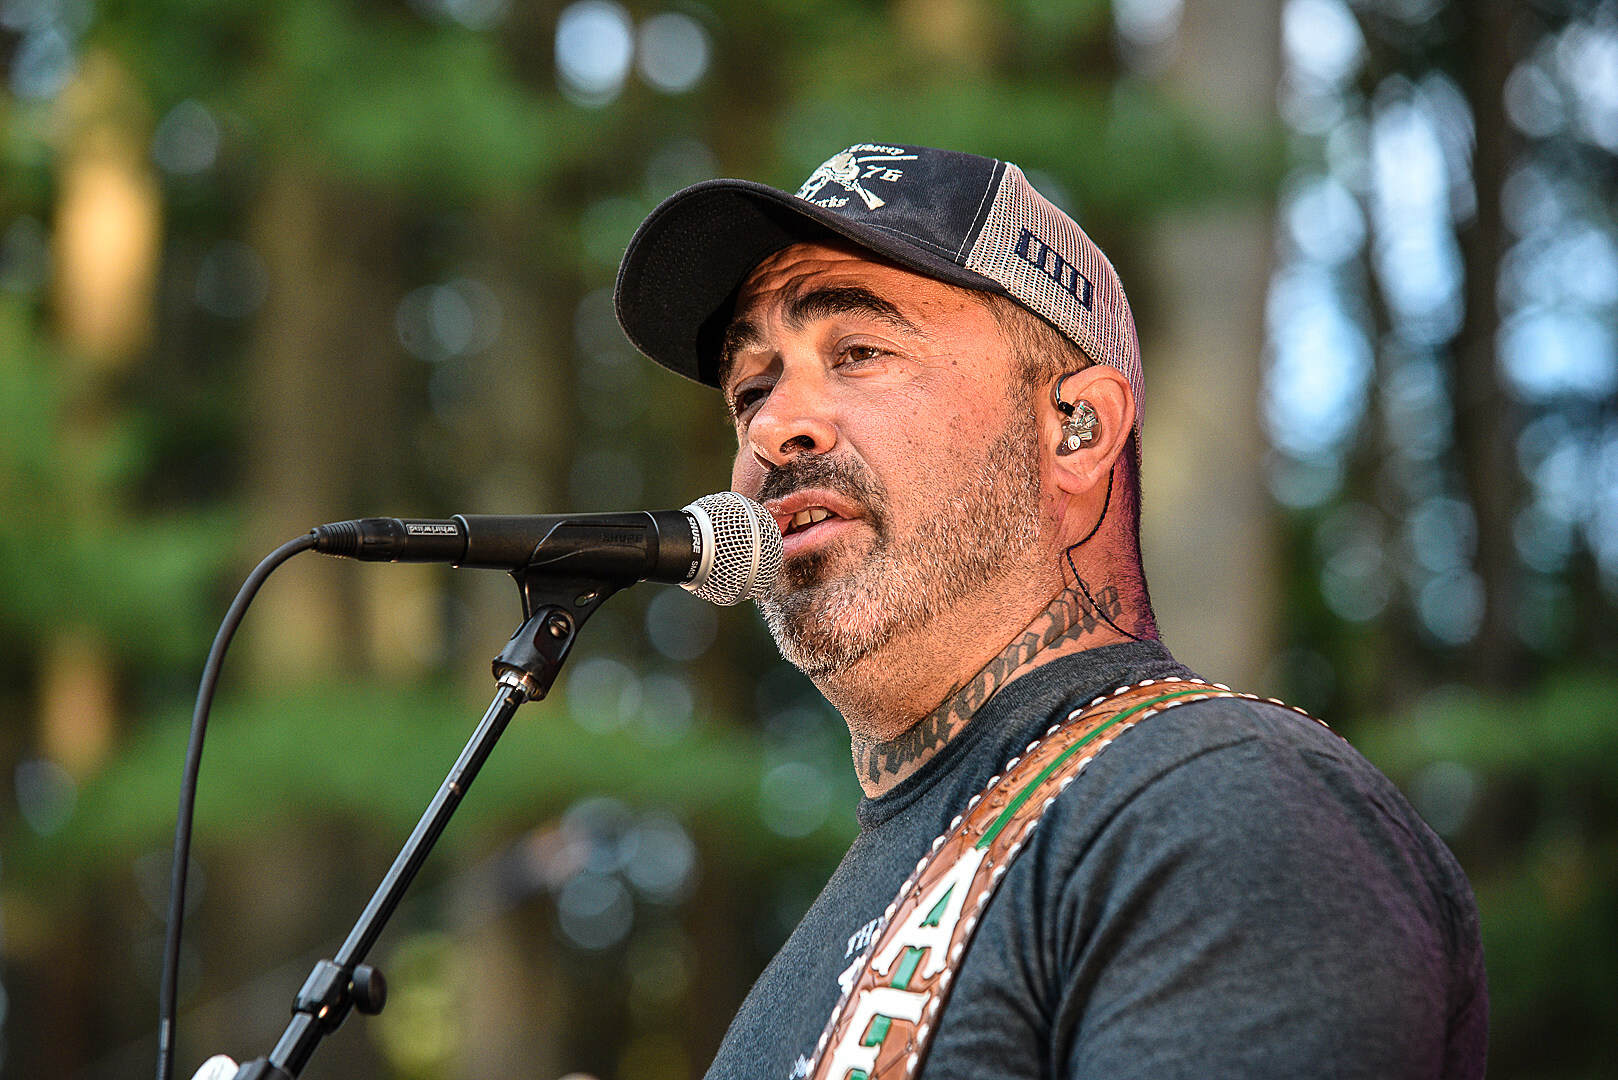 Who Was Aaron Lewis The Lead Singer For